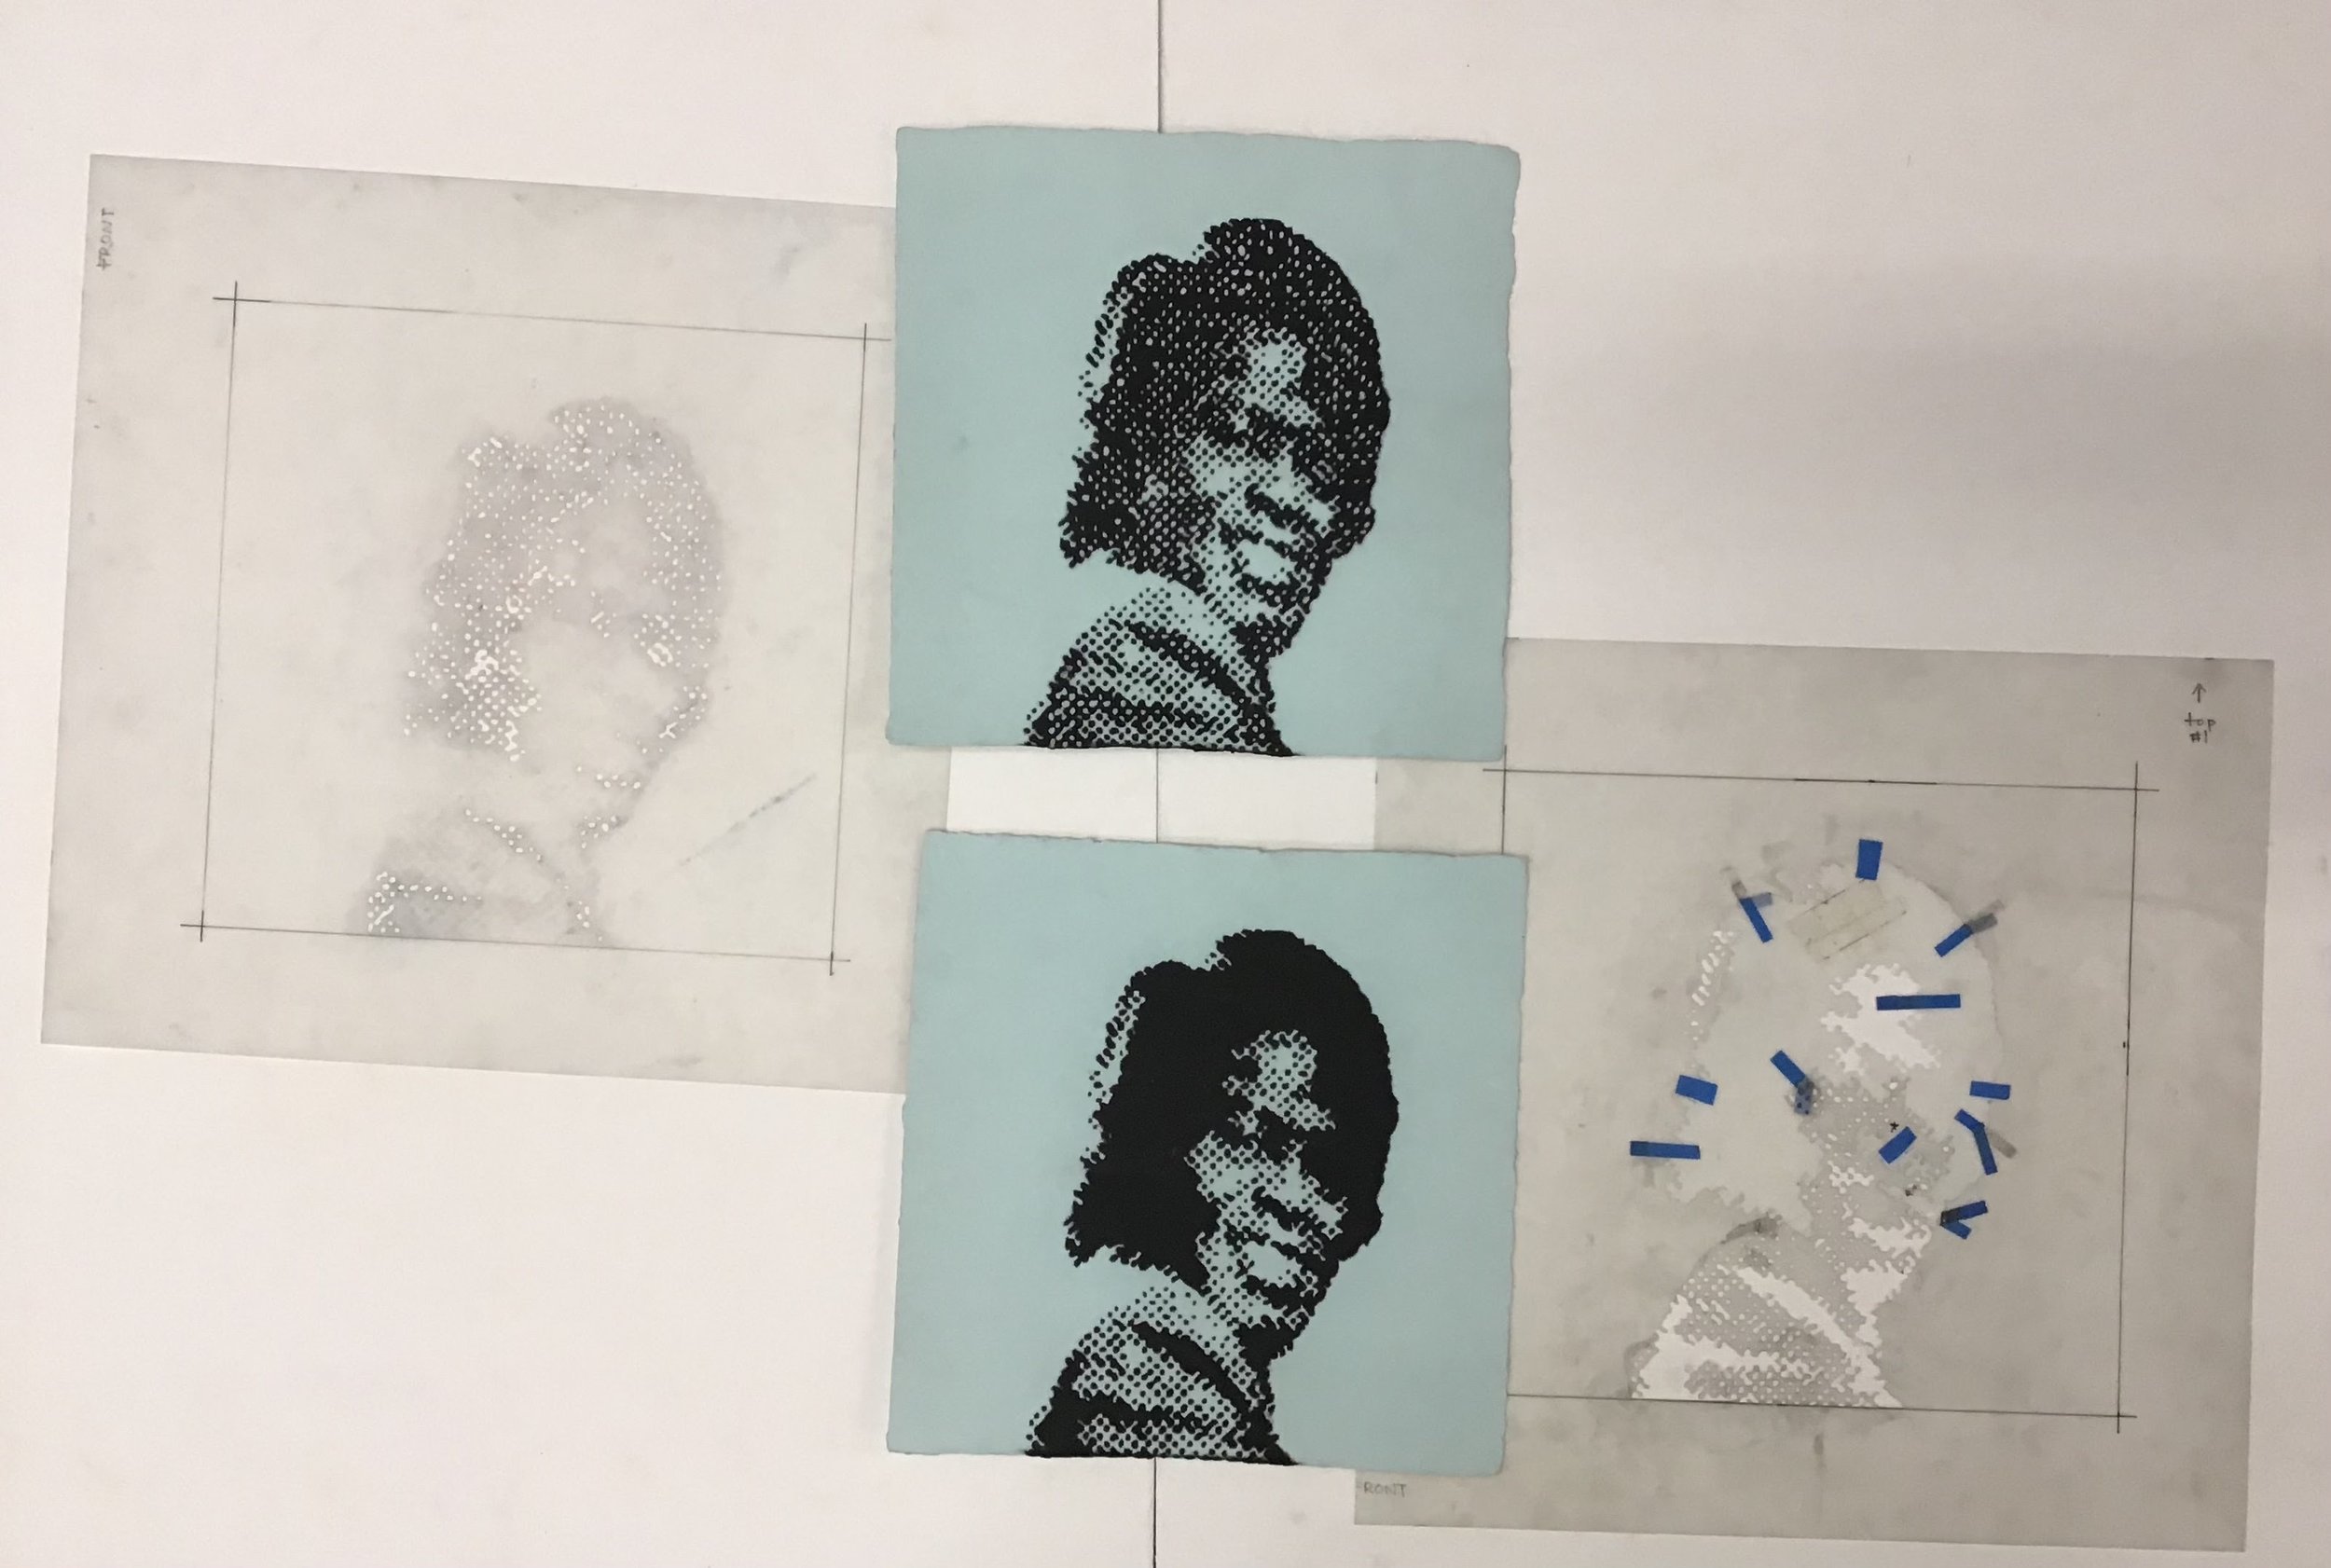  Didactic of Glenn Ligon's&nbsp; Self-portrait at 9 years old , 2008.&nbsp;Stenciled pulp on handmade paper, 12 x 12 inches.&nbsp; 